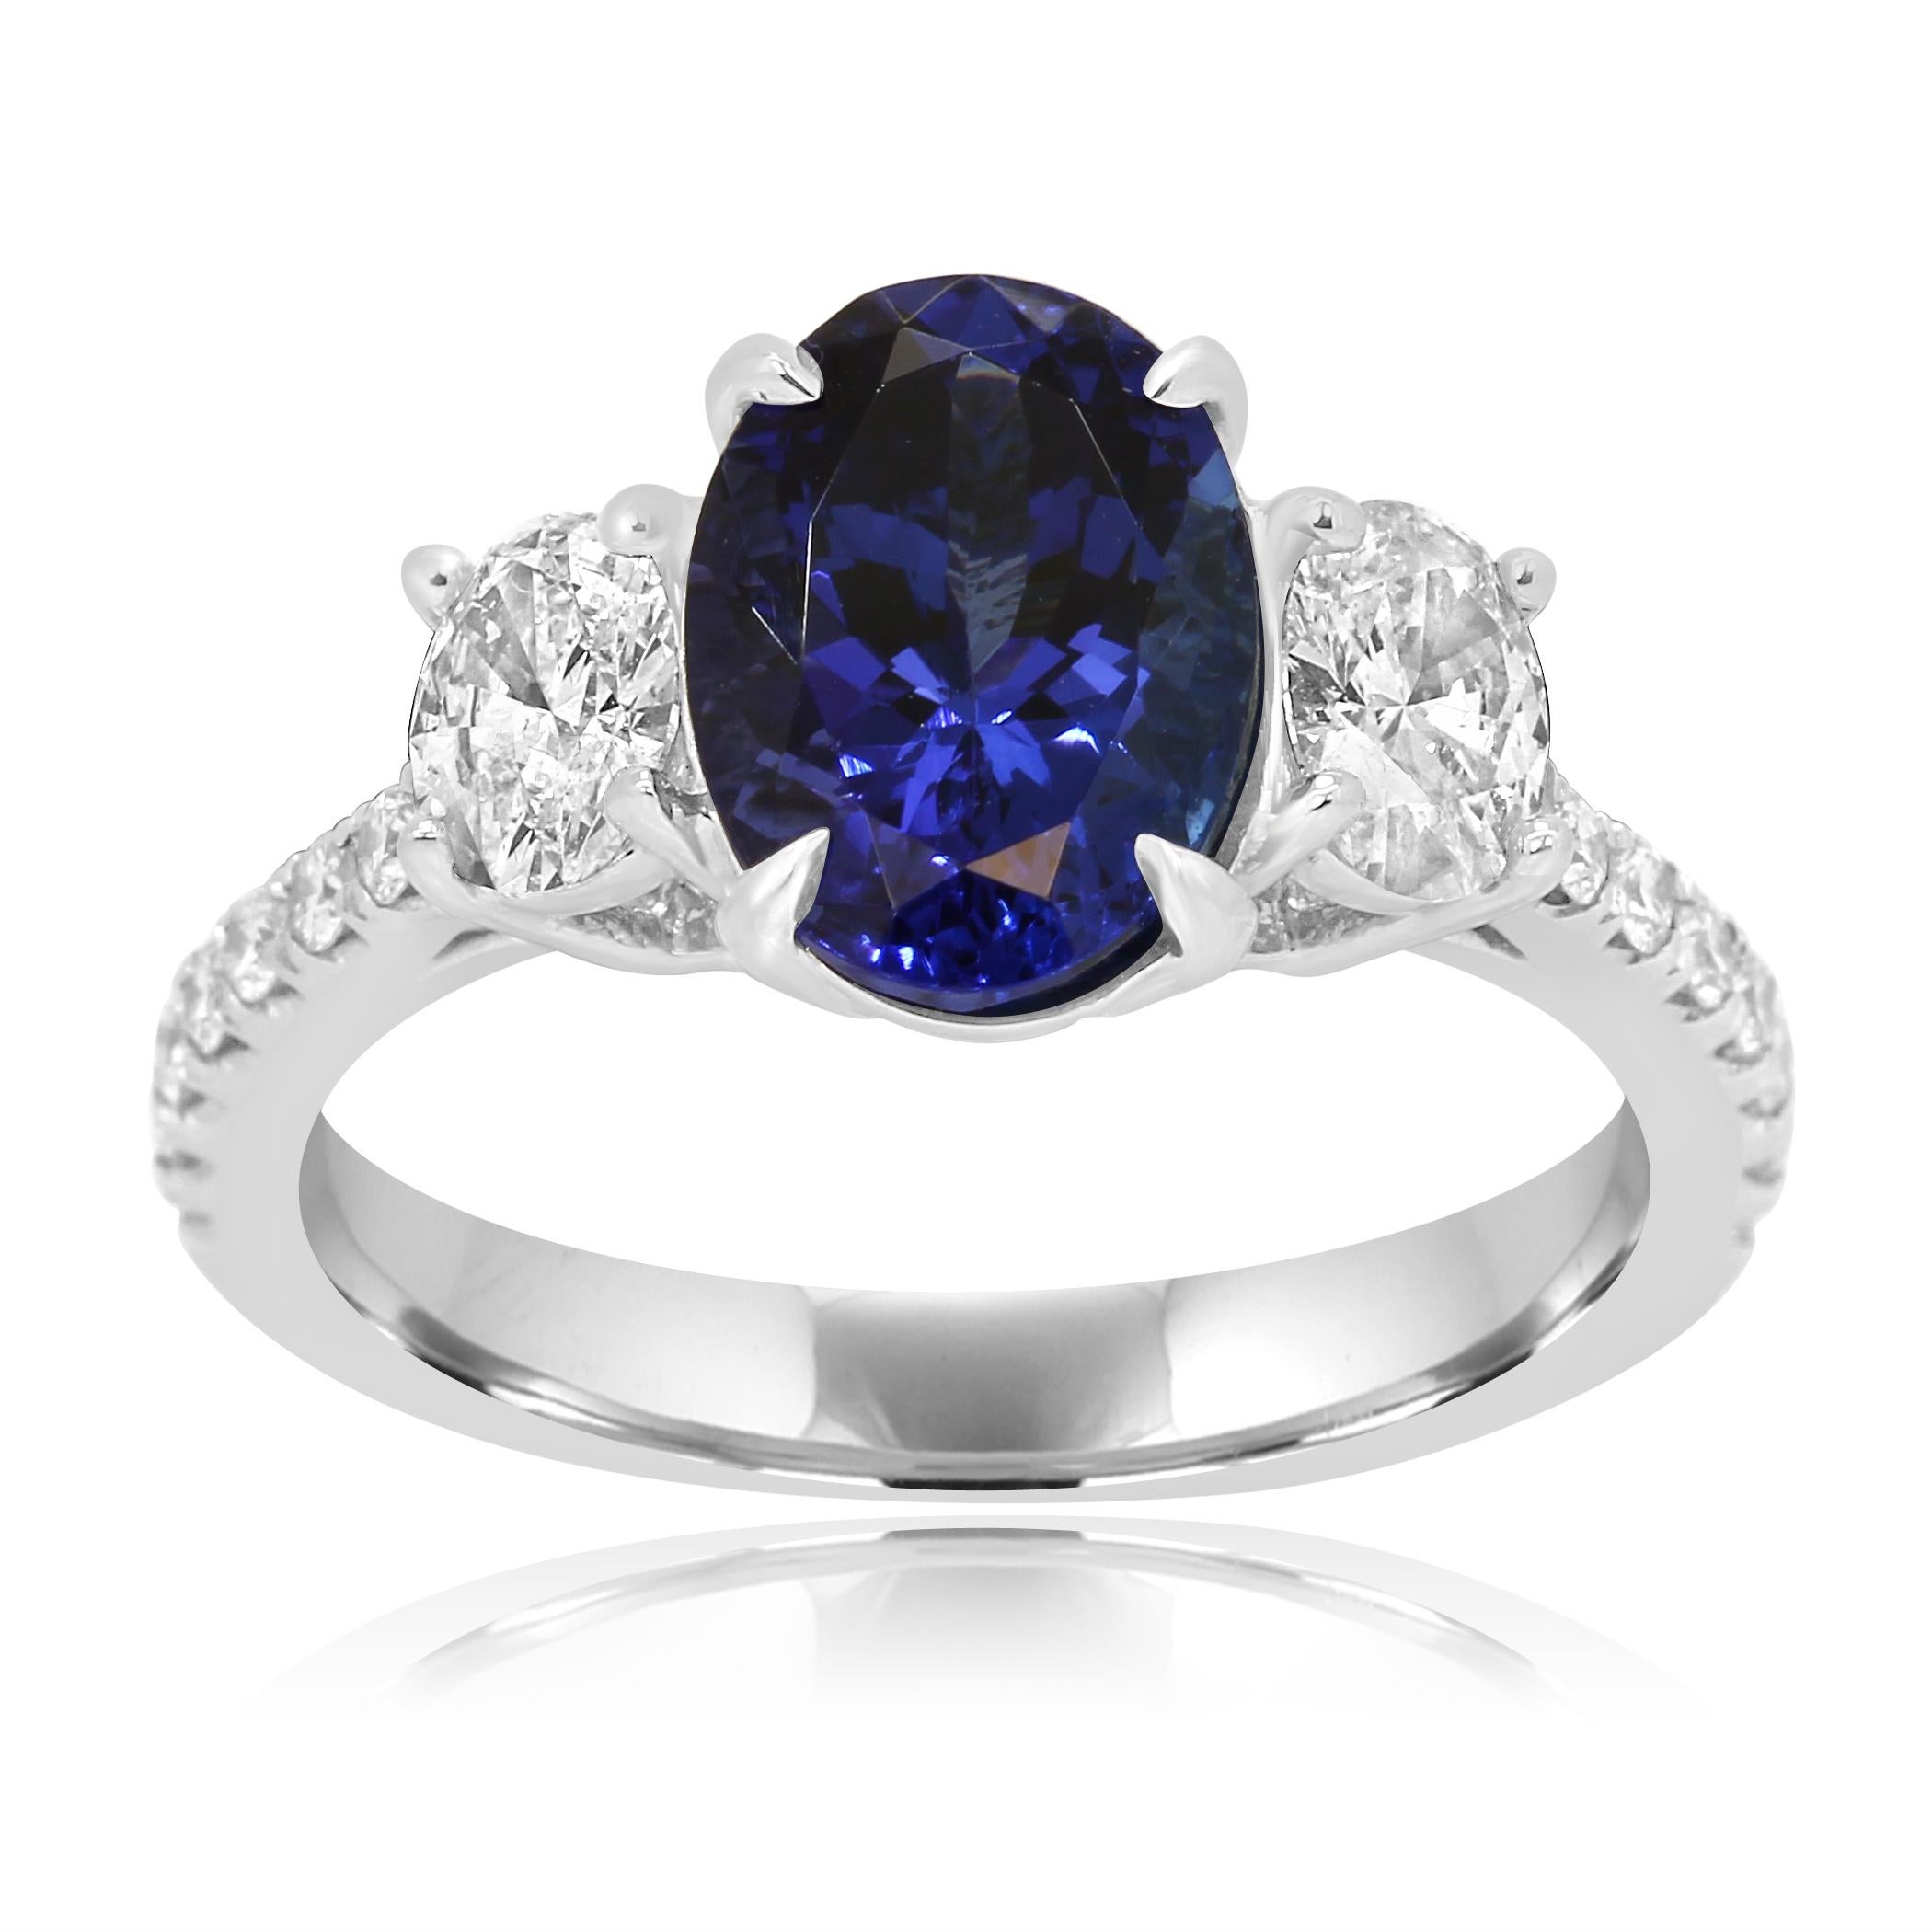 Gorgeous Tanzanite Oval 2.44 Carat Flanked With 2 Colorless Diamond Oval SI Clarity 0.60 Carat and Colorless Diamond Round SI Clarity 0.21 Carat in Classic yet Chic Three Stone Bridal Cocktail 18K White Gold Ring.

Style available in different price